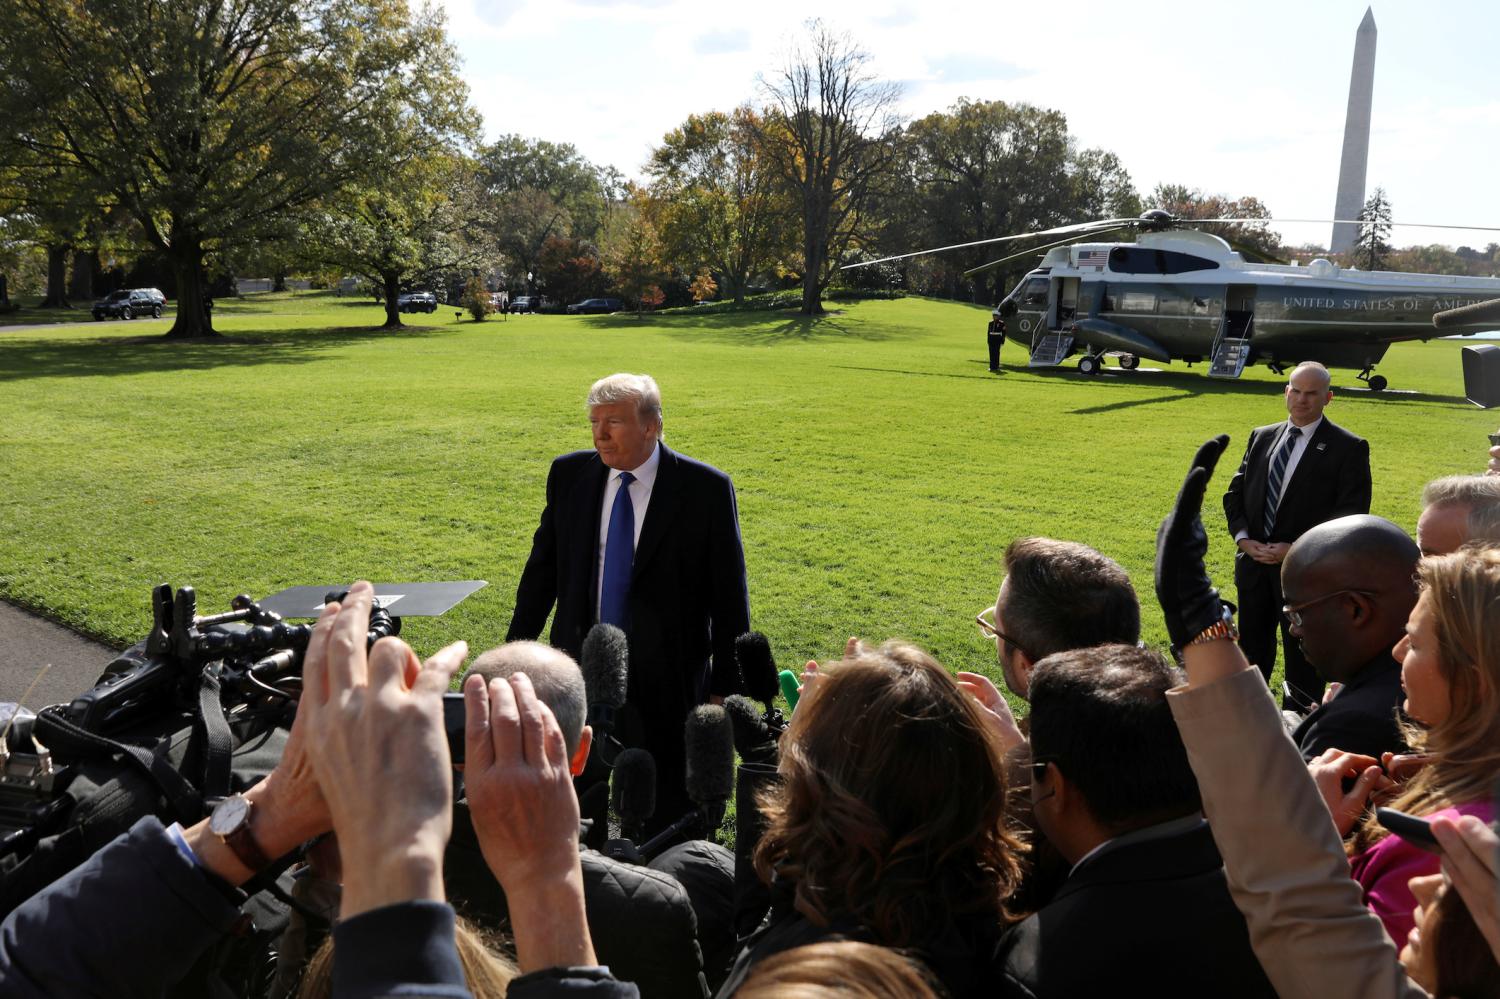 U.S. President Donald Trump speaks to the news media before boarding Marine One to depart for travel to Georgia from the South Lawn of the White House in Washington, U.S., November 8, 2019. REUTERS/Leah Millis - RC247D90BIFM